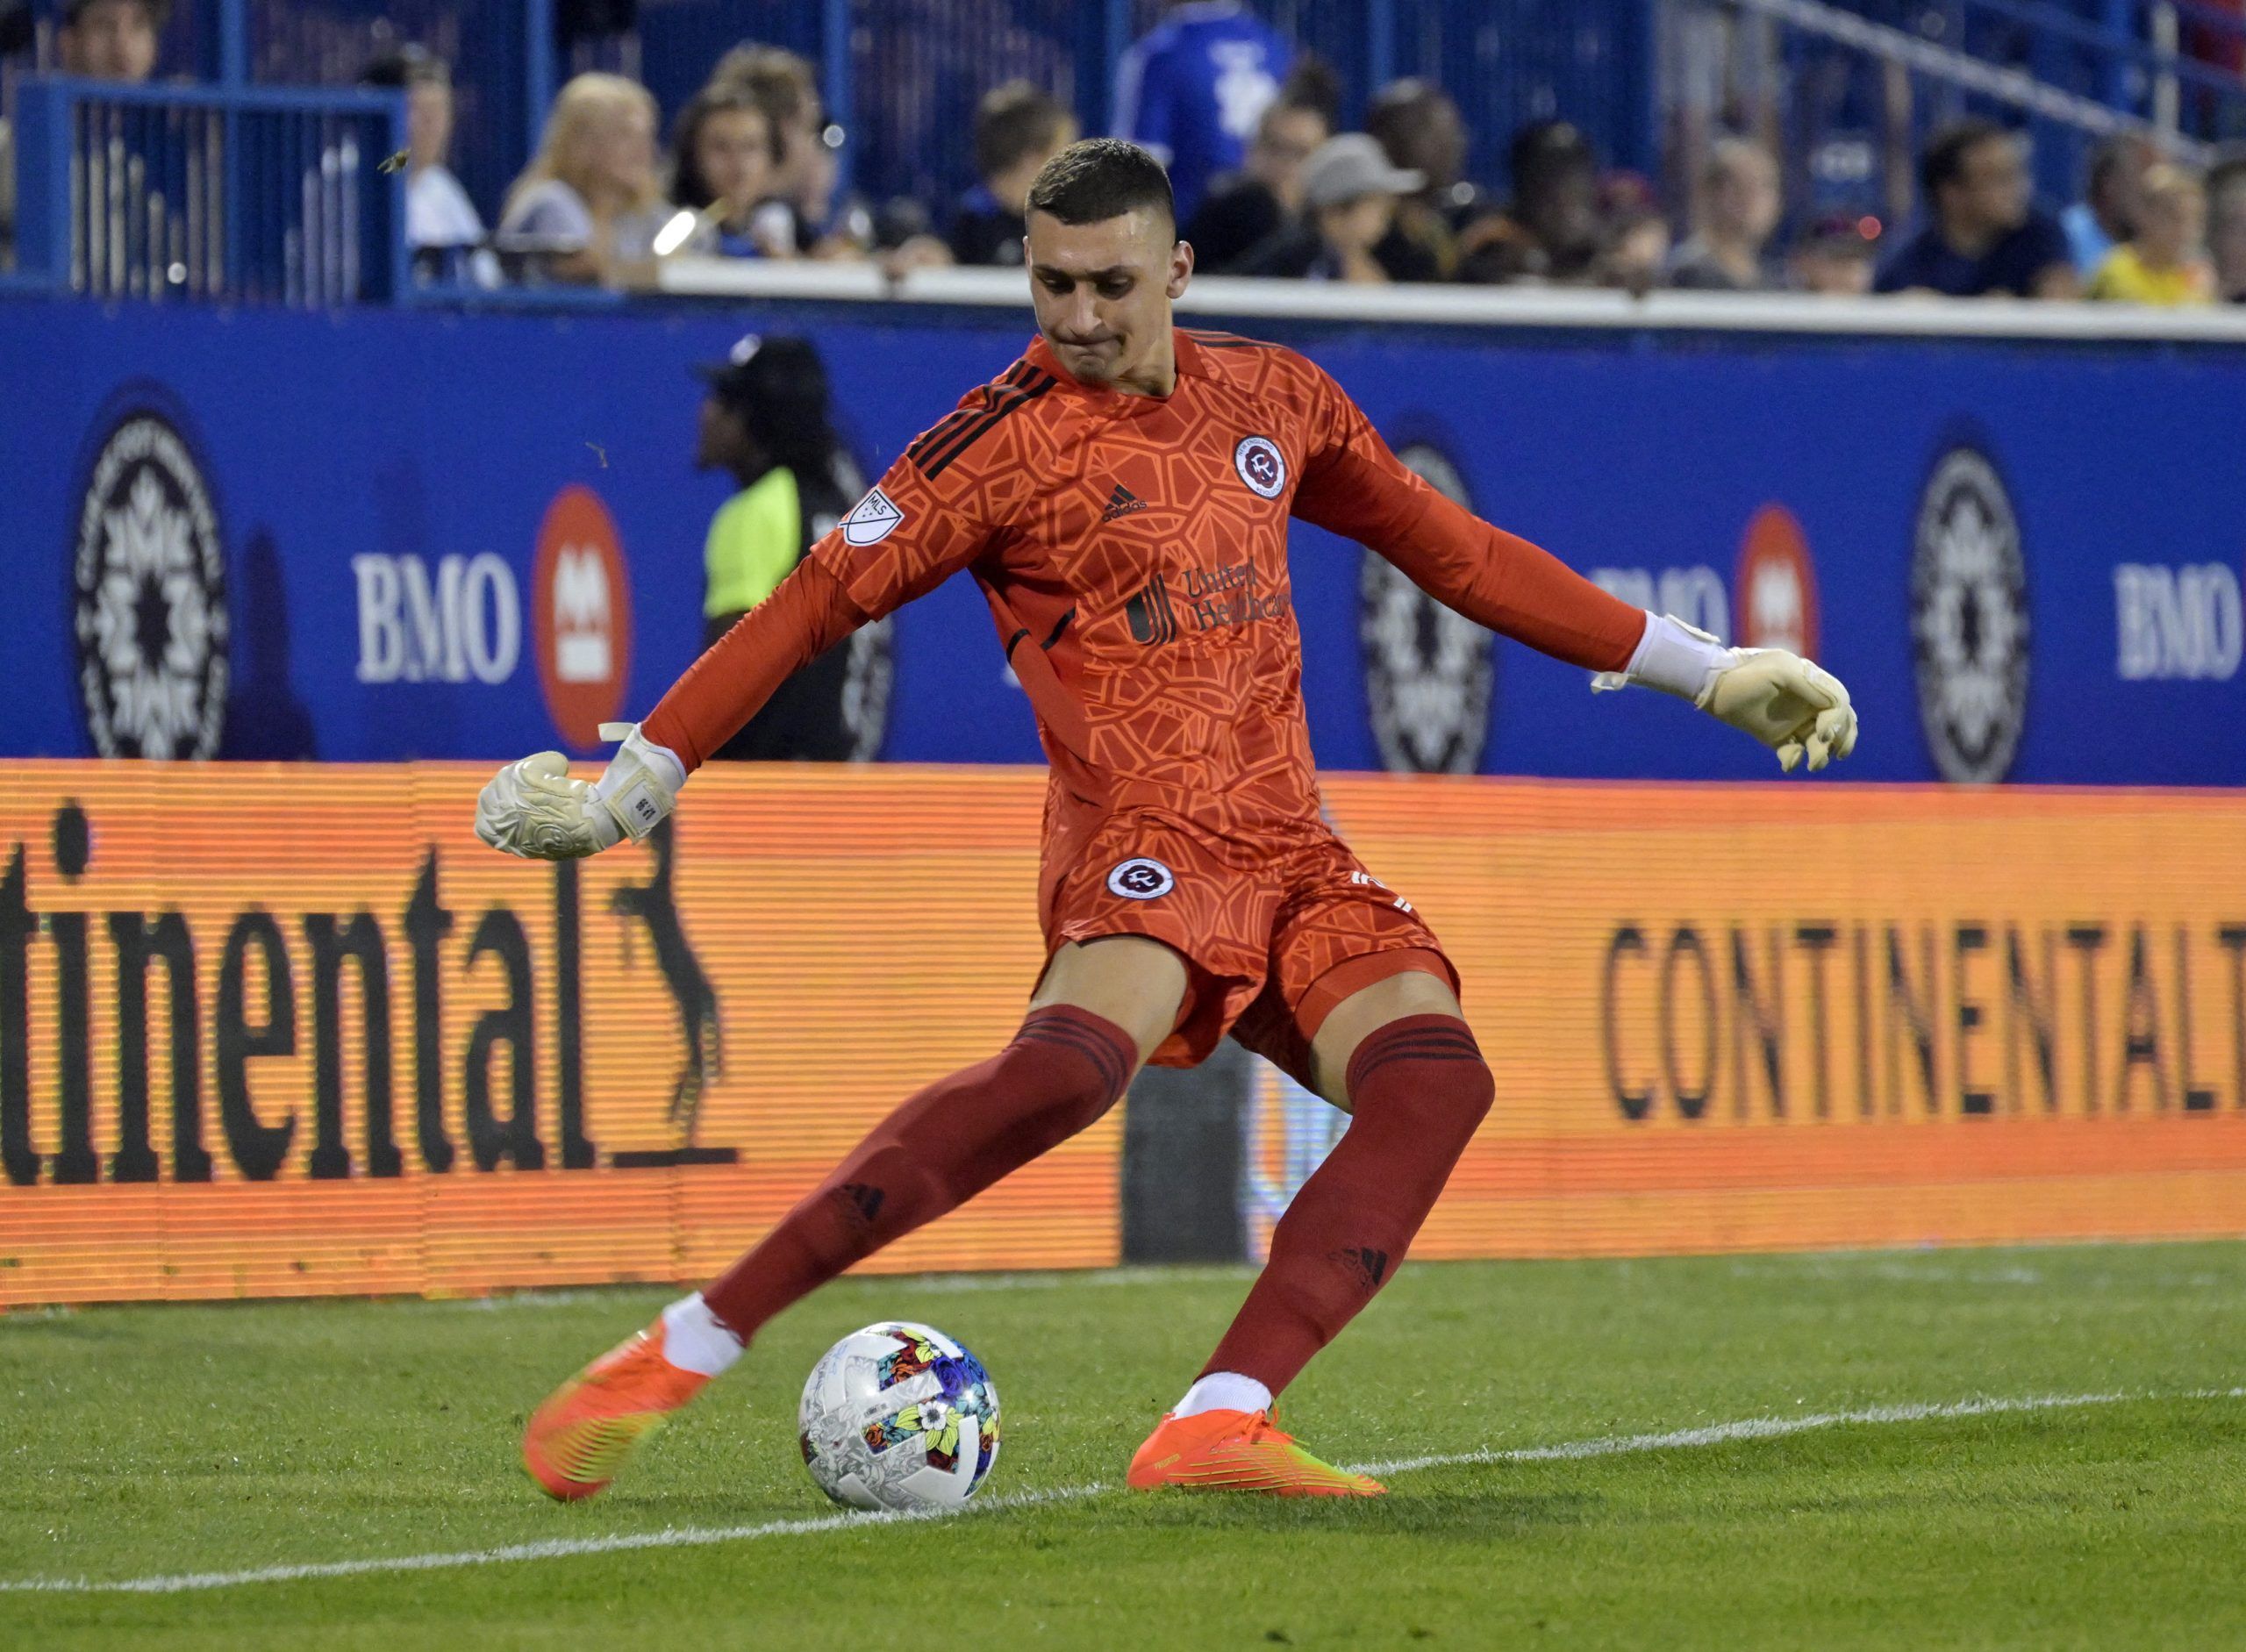 Aug 20, 2022; Montreal, Quebec, CAN; New England Revolution goalkeeper Djordje Petrovic (99) kicks the ball against CF Montreal during the first half at Stade Saputo. Mandatory Credit: Eric Bolte-USA TODAY Sports